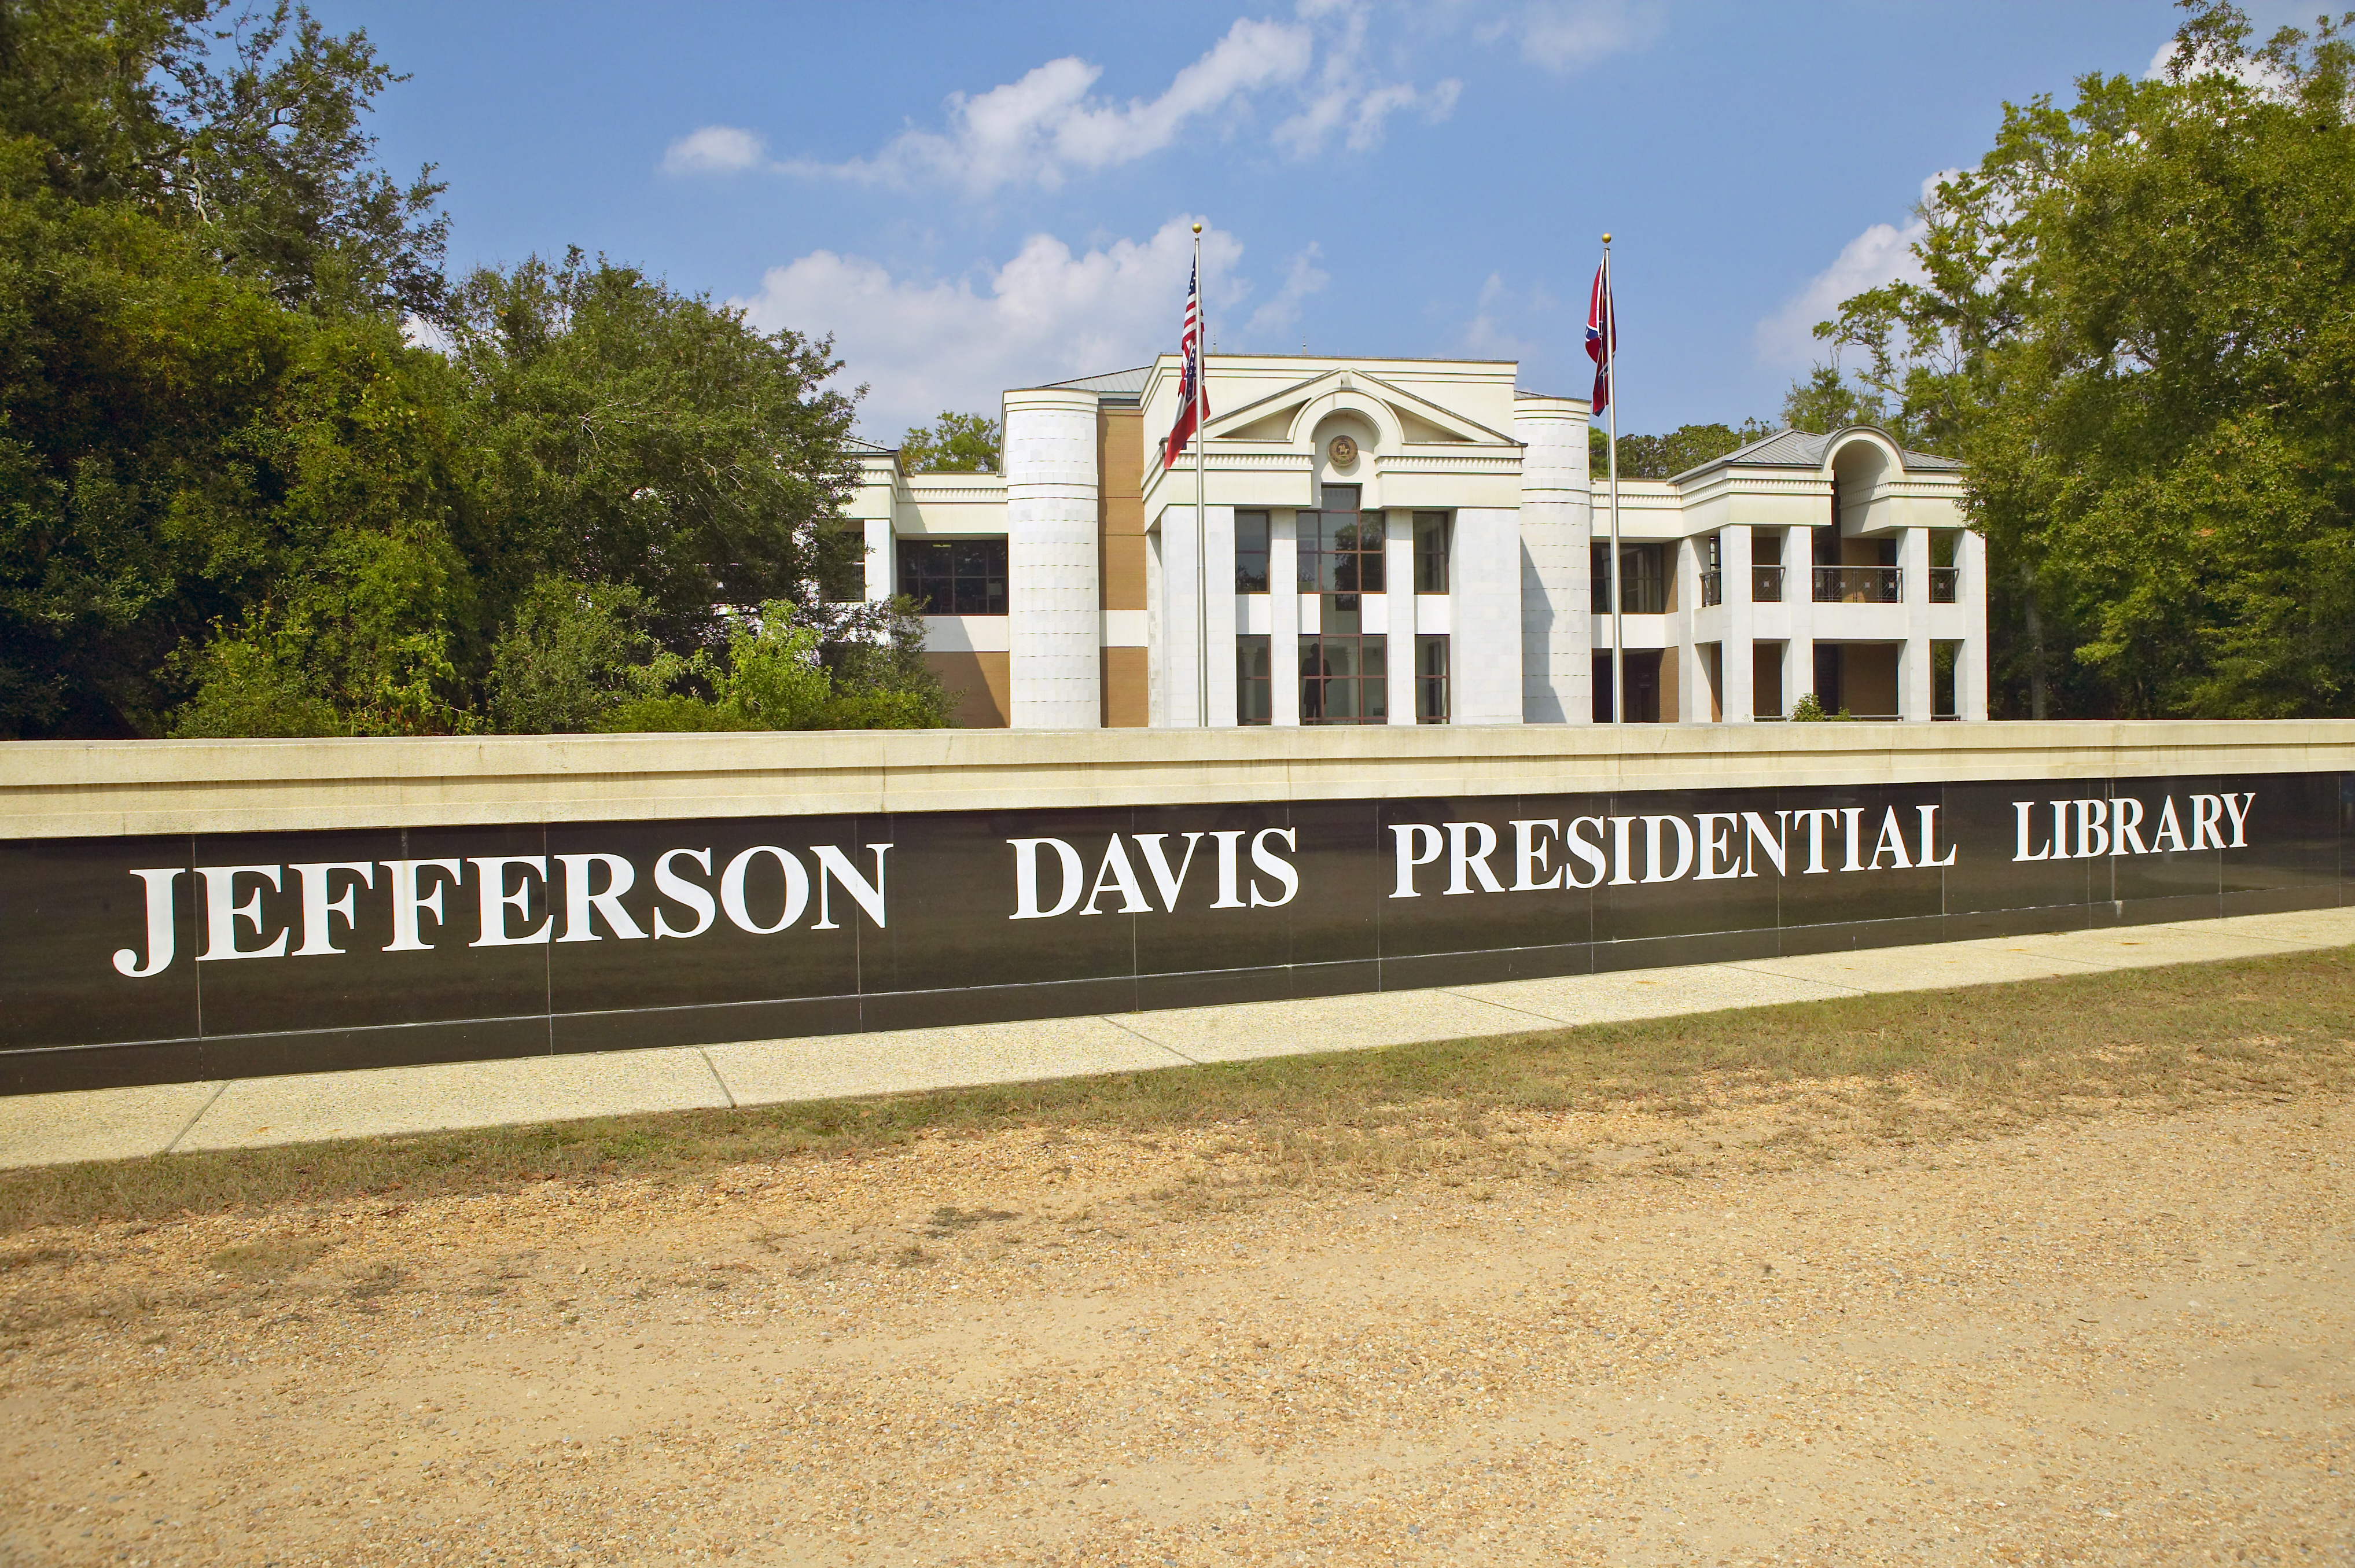 Sign in front of the Jefferson Davis Presidential Library in Biloxi, MS